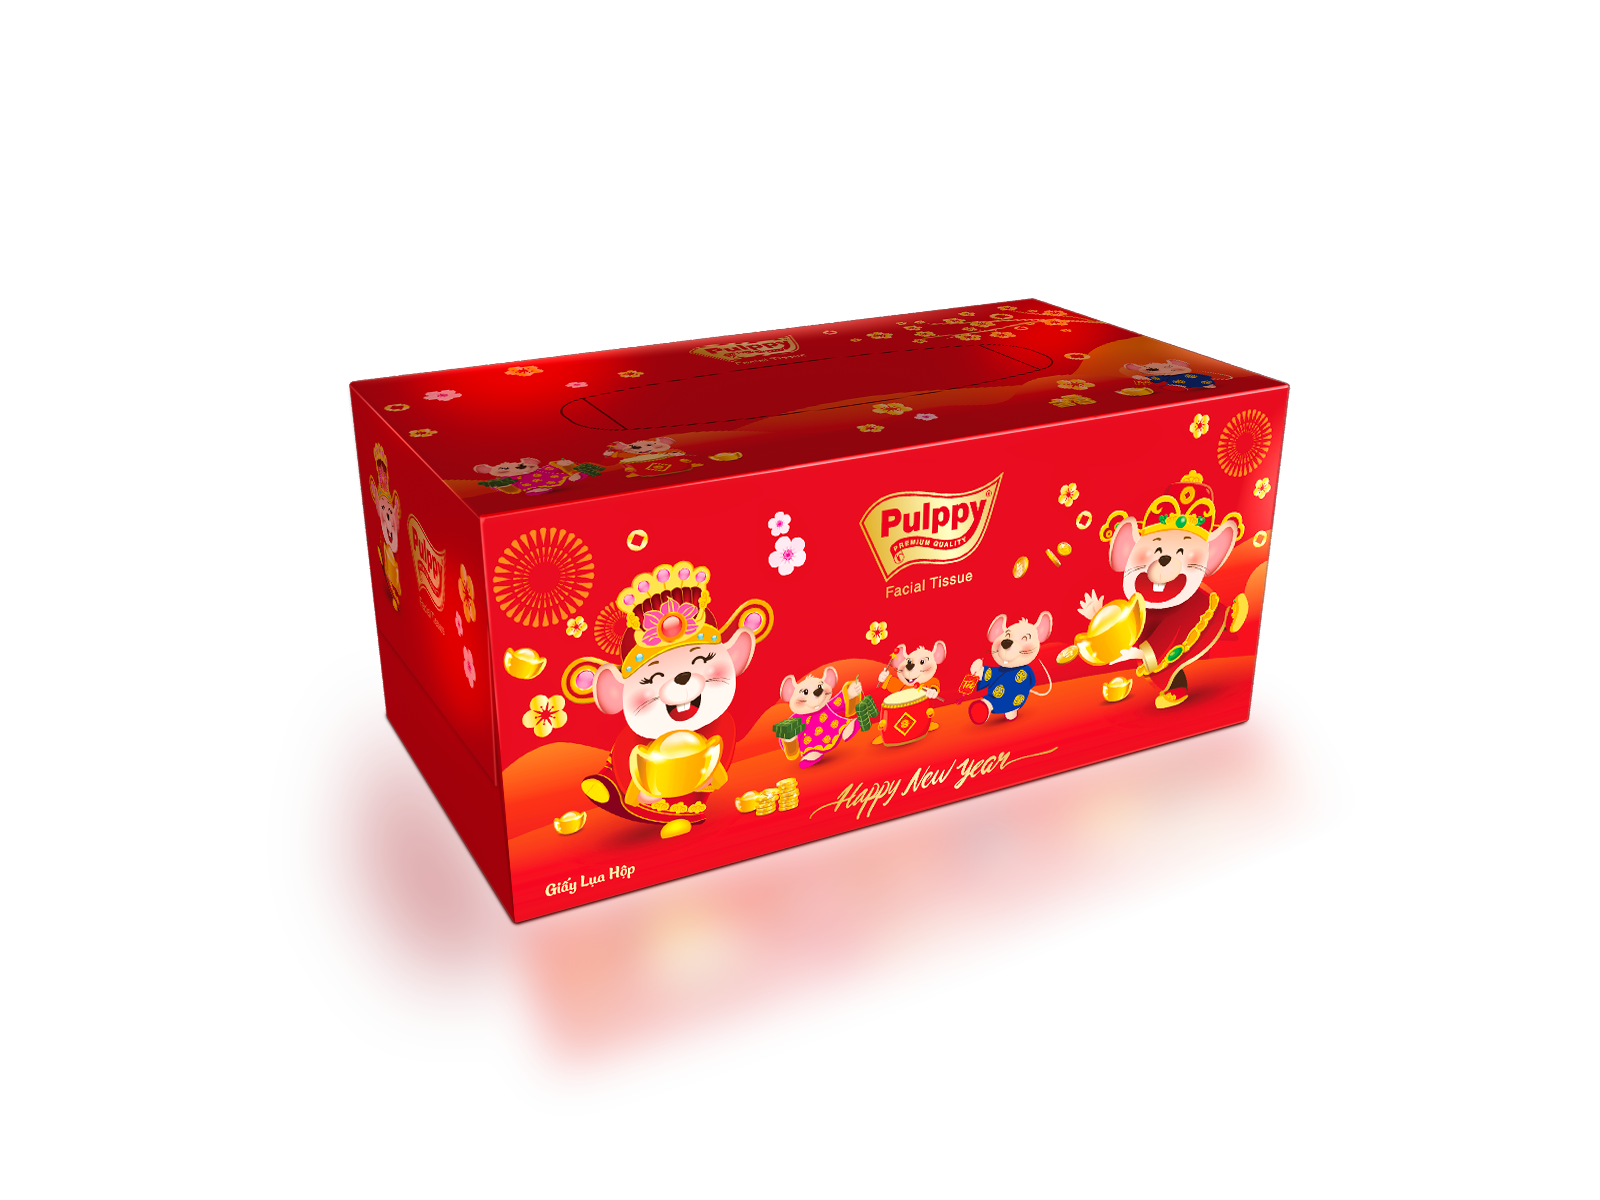 Pulppy designed a brand new New Year limited packaging for Year 202... -  NEW TOYO PULPPY (VIETNAM) CO., LTD.